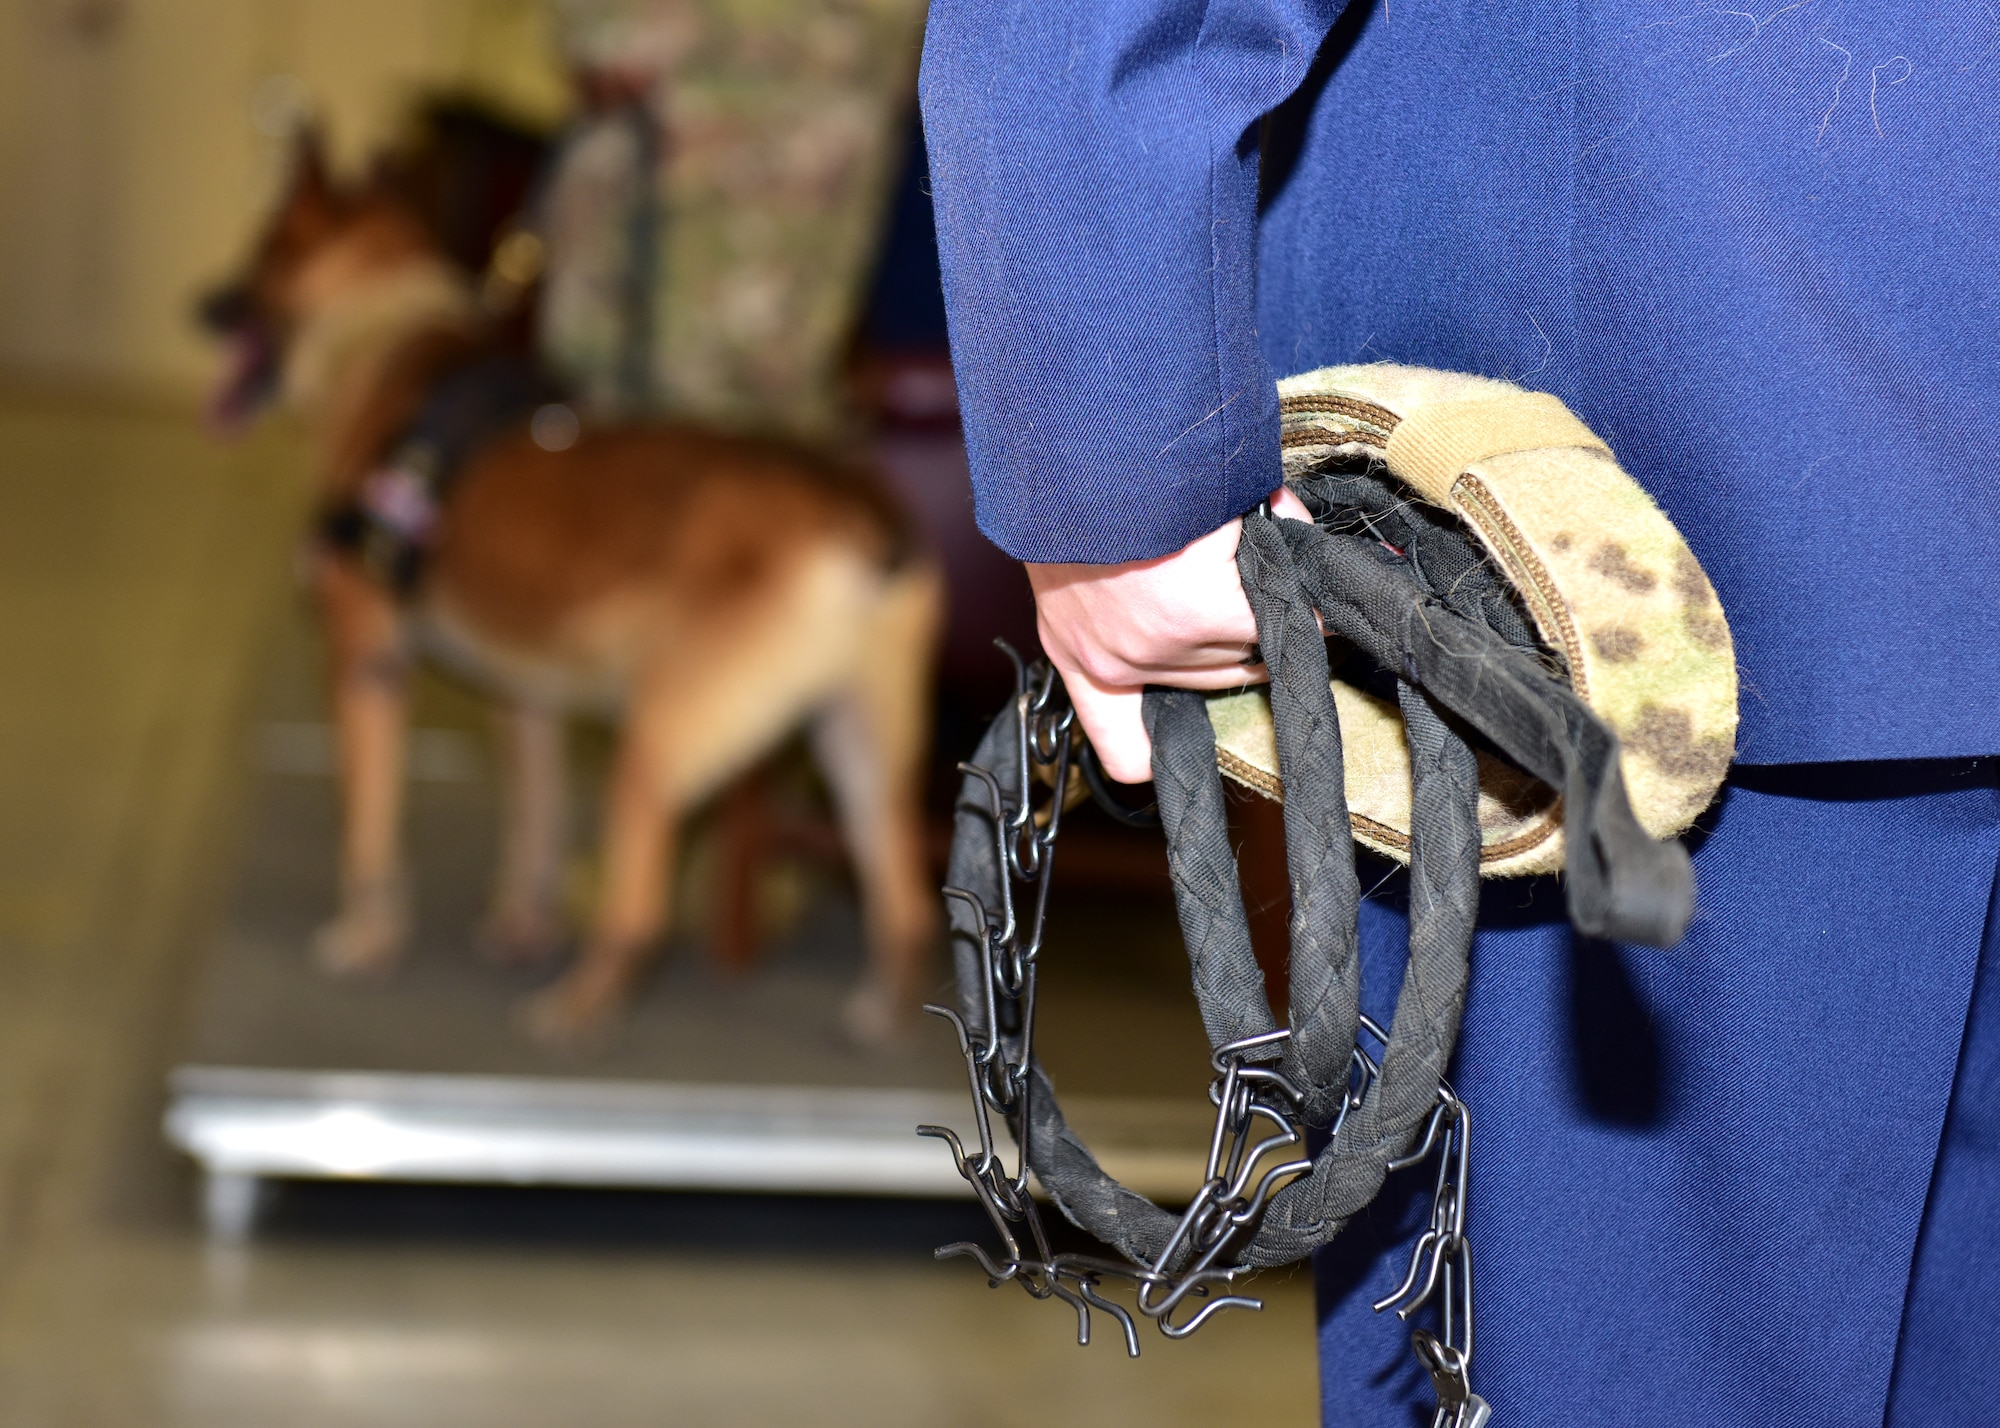 Military working dogs retire inside a building surrounded by people in uniform.